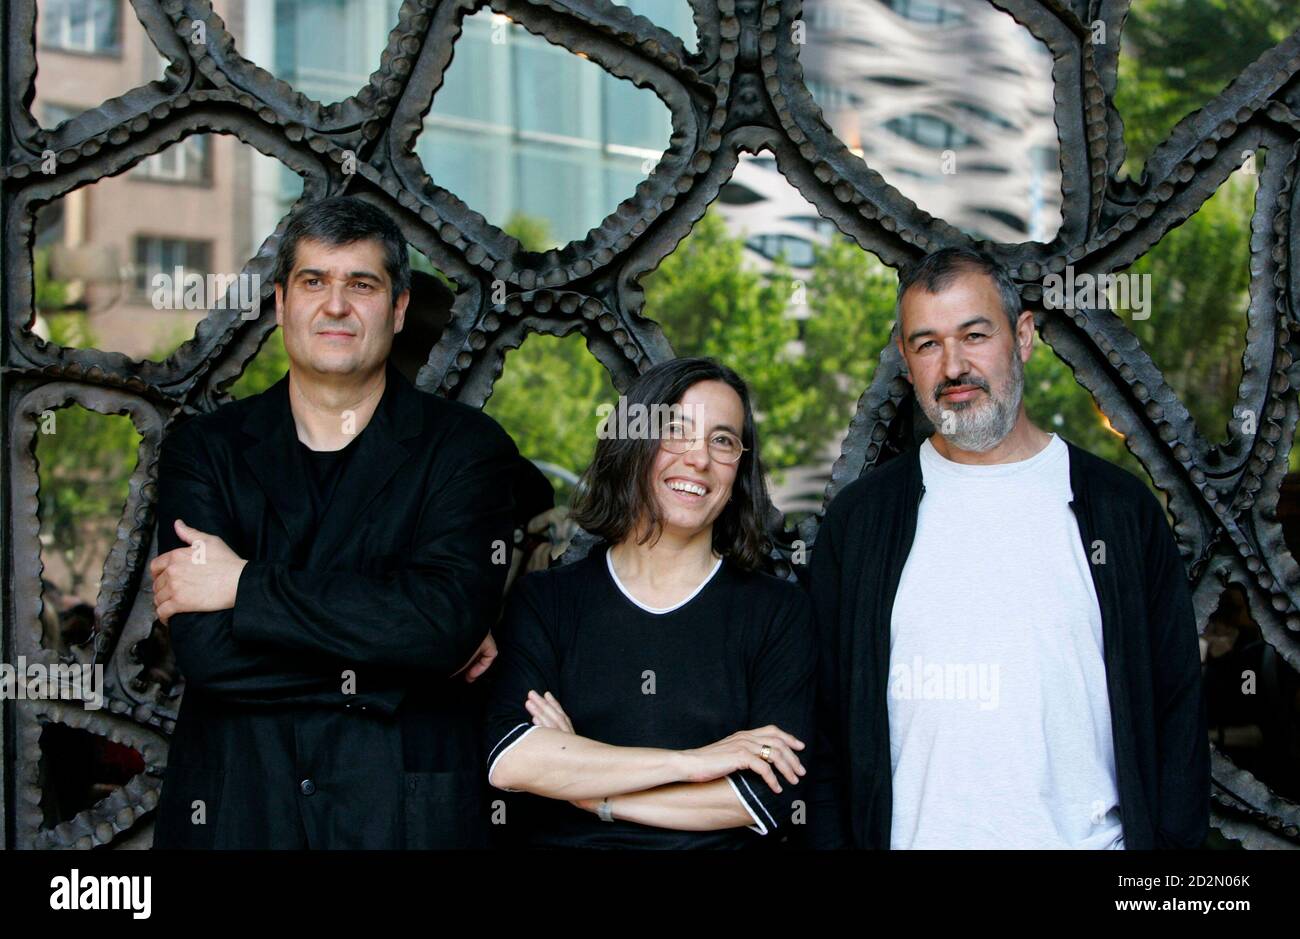 (L-R) Rafael Aranda, Carme Pigem and Ramon Vilalta from RCR Arquitectes, finalists in the Mies van der Rohe Arch European Union Prize 2009, pose in front of the modernist building by architect Antoni Gaudi called 'La Pedrera' in central Barcelona April 22, 2009. The winner of the architecture prize will be announced on April 29, 2009.   REUTERS/Gustau Nacarino  (SPAIN SOCIETY) Stock Photo